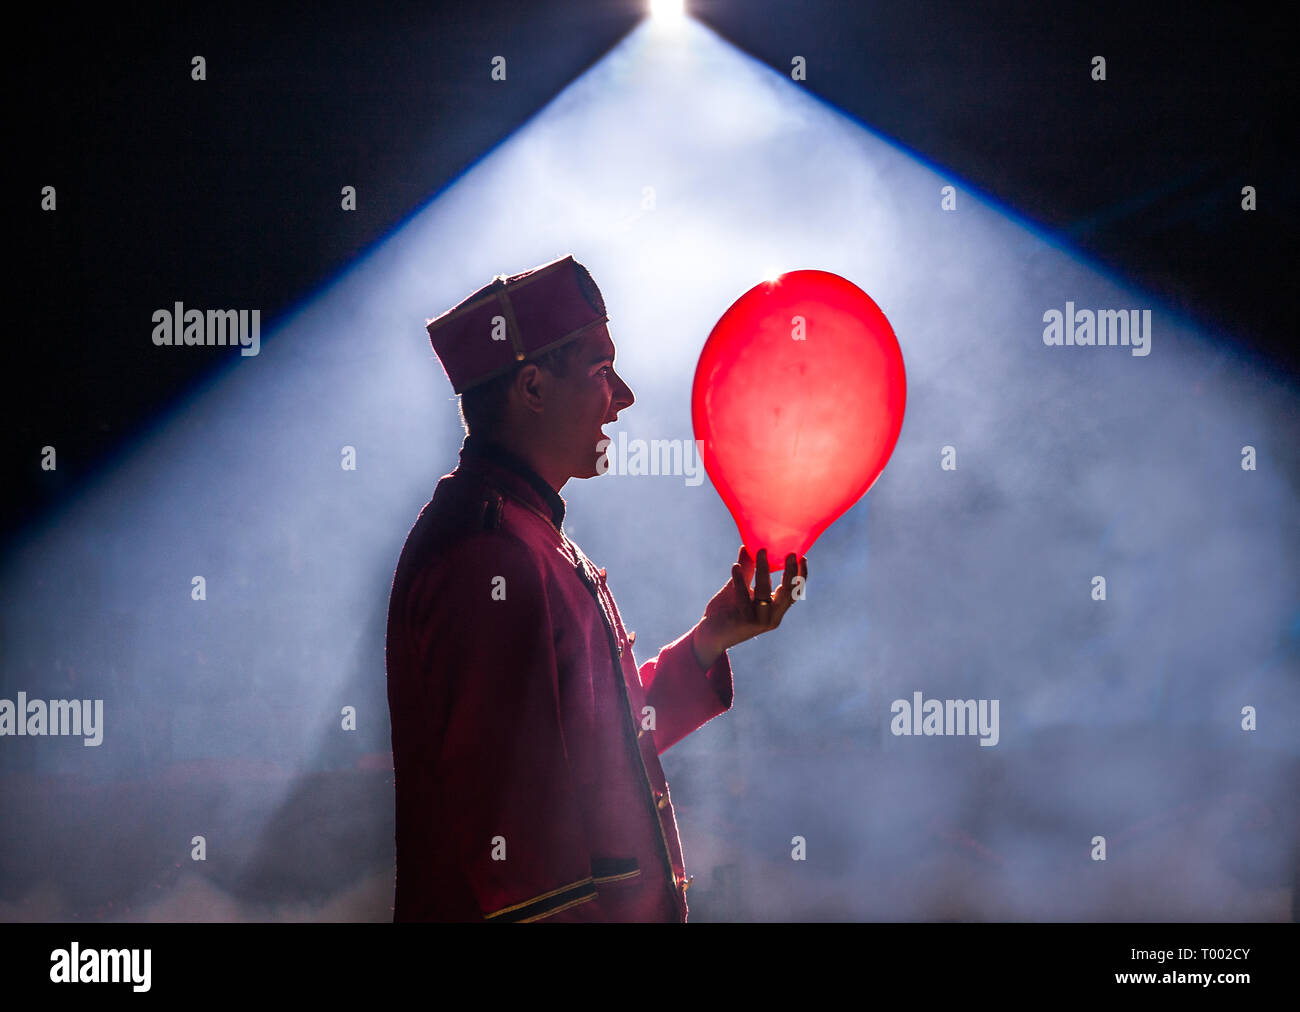 Carrigaline, Cork, Ireland. 16th March, 2019. Clown Marc Dorffner from Berlin  of Circus Gerbola performing durning the matinee in the big top at Carrigaline, Co. Cork, Ireland. Credit: David Creedon/Alamy Live News Stock Photo